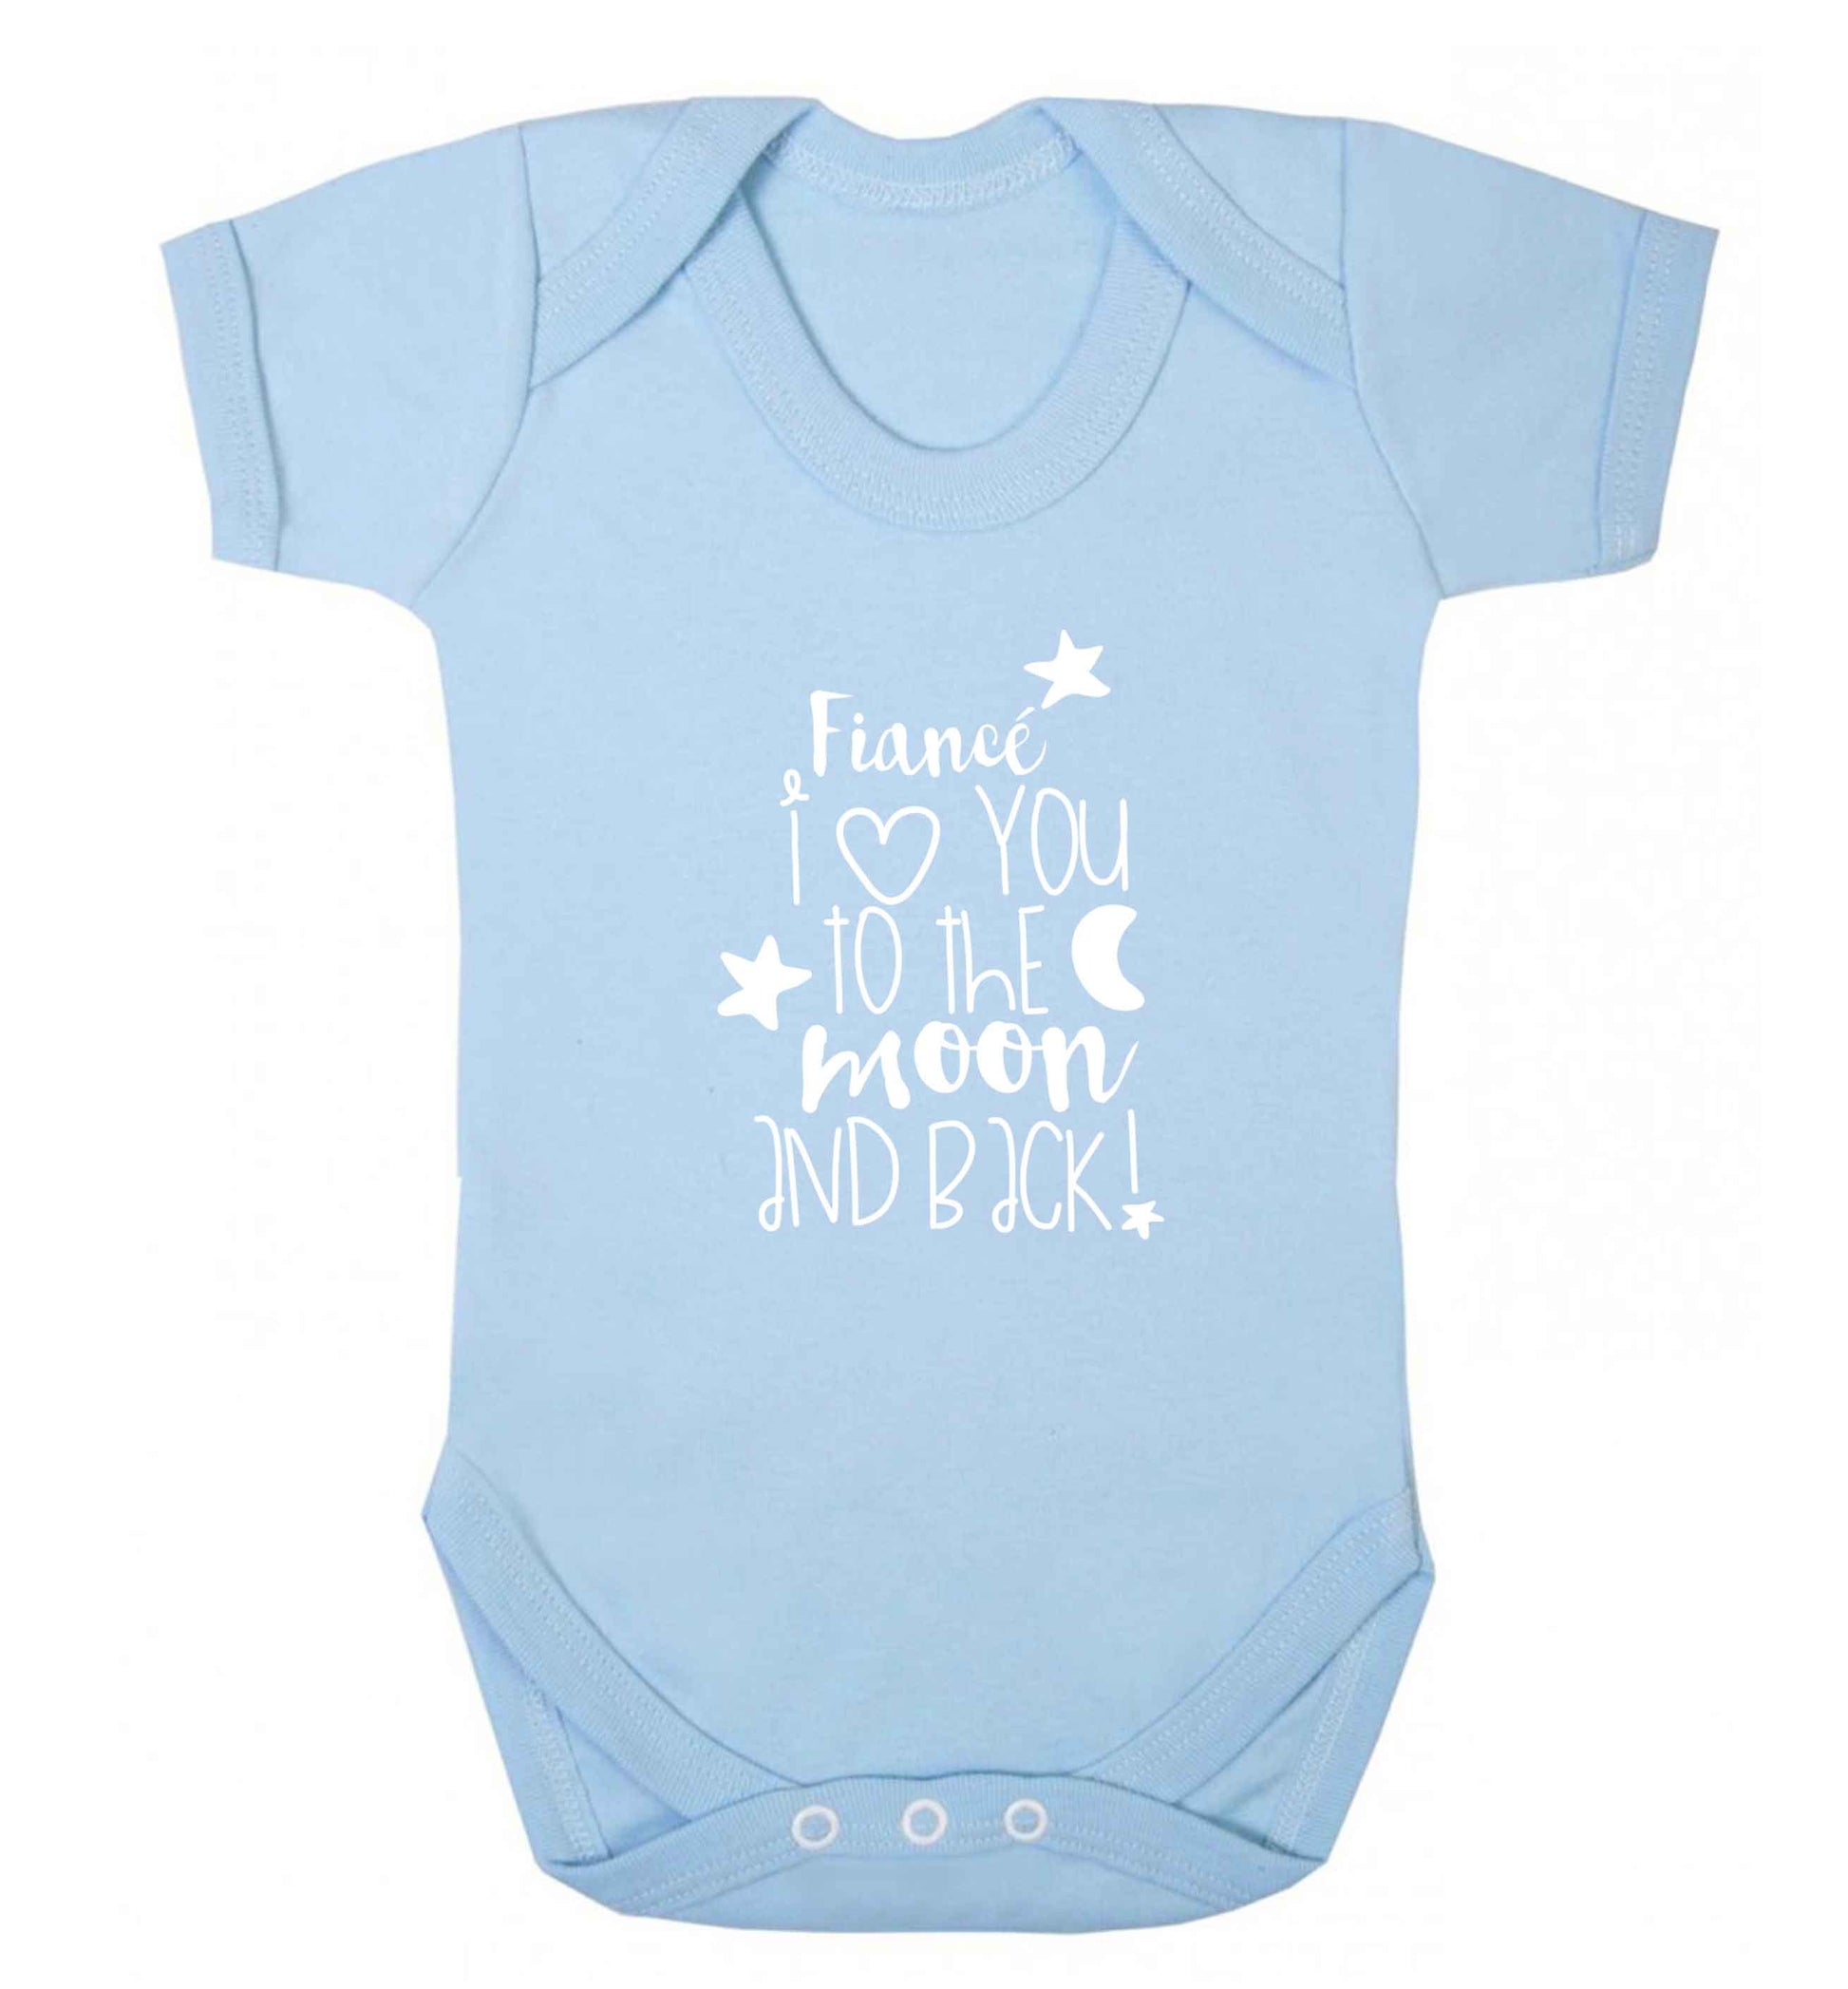 Fianc√© I love you to the moon and back baby vest pale blue 18-24 months